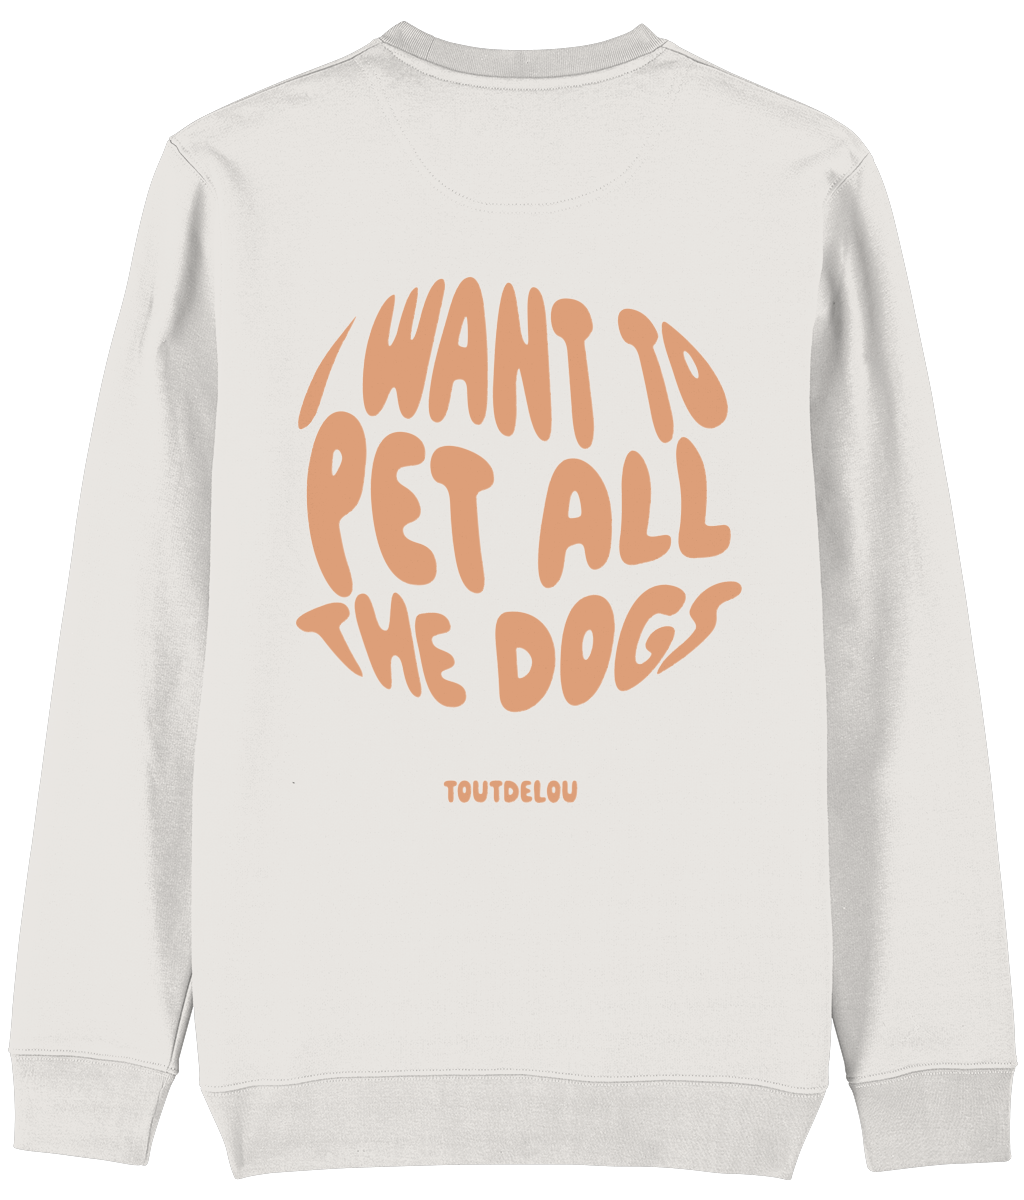 Sweater - pet all the dogs - peach - print on back